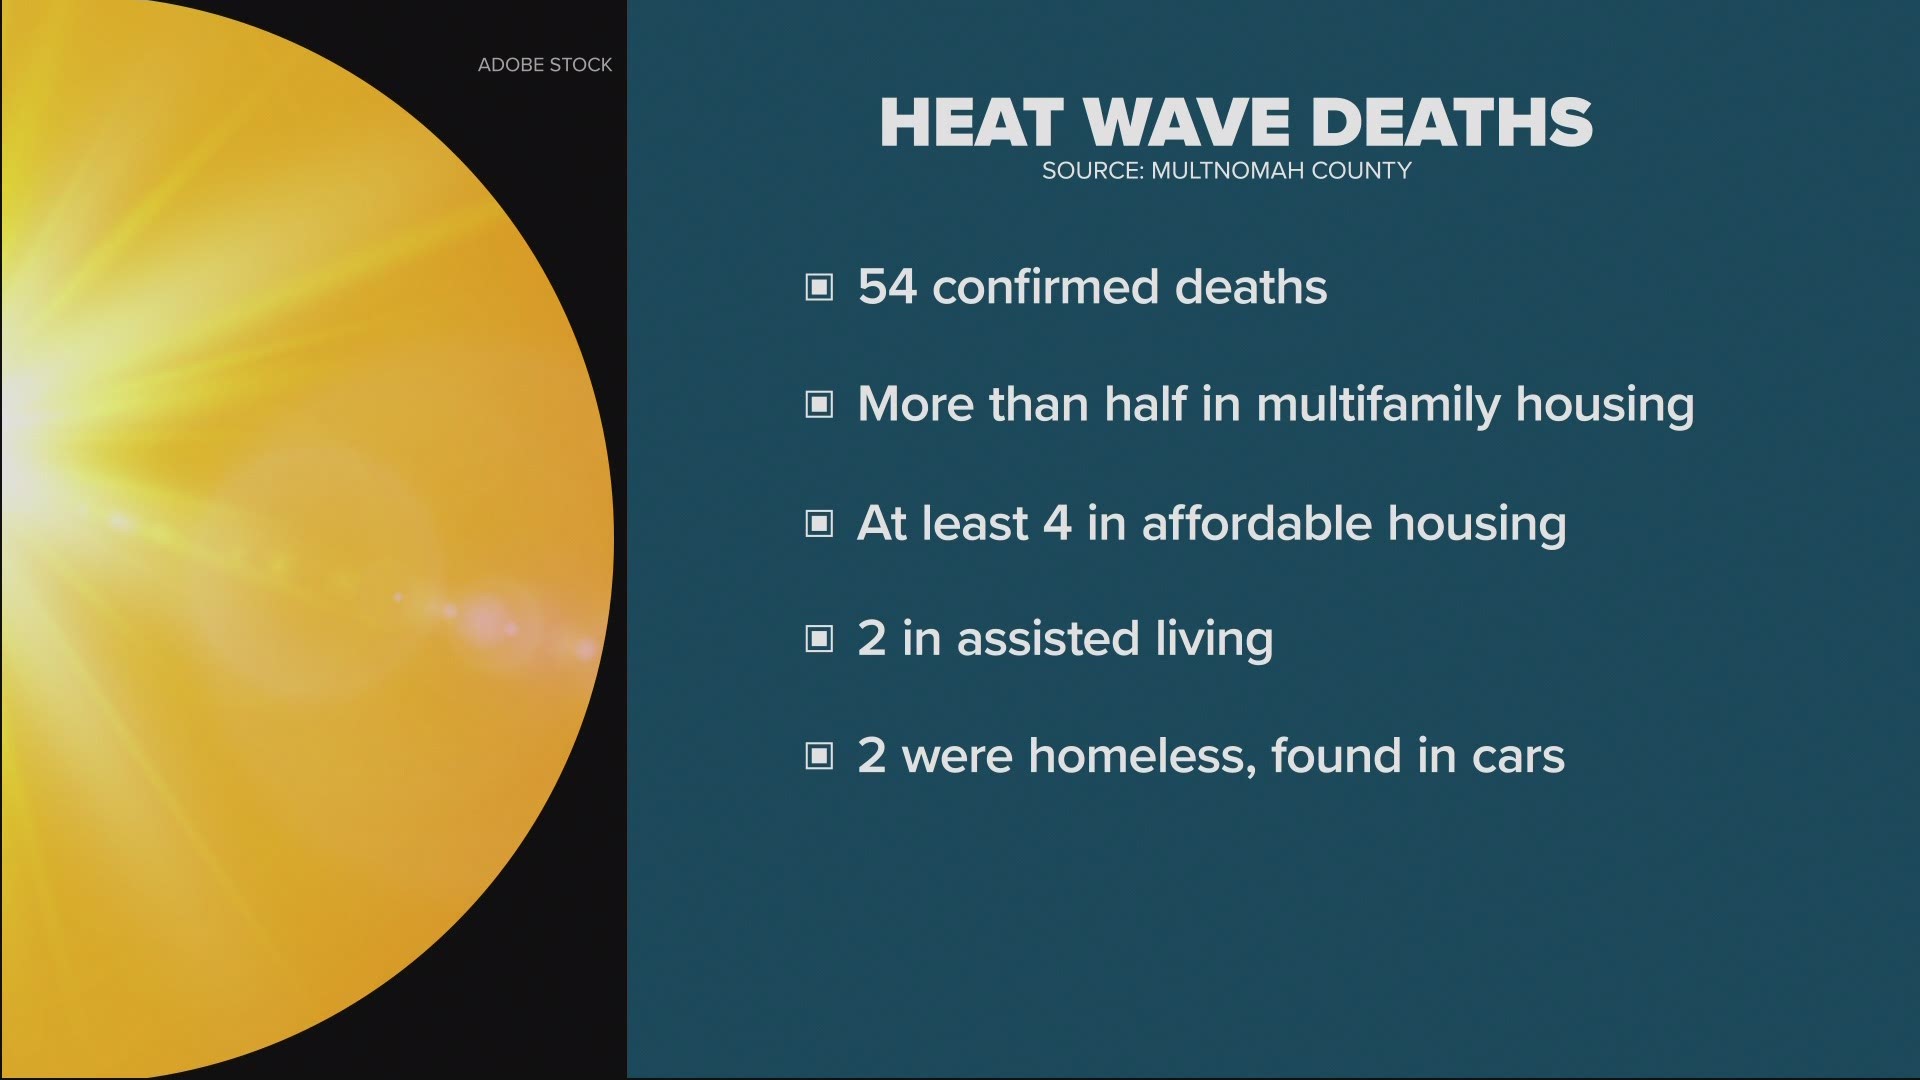 We kept asking questions about Multnomah County’s heat wave deaths until we got answers. Today, the county released details about who died and what types of homes th